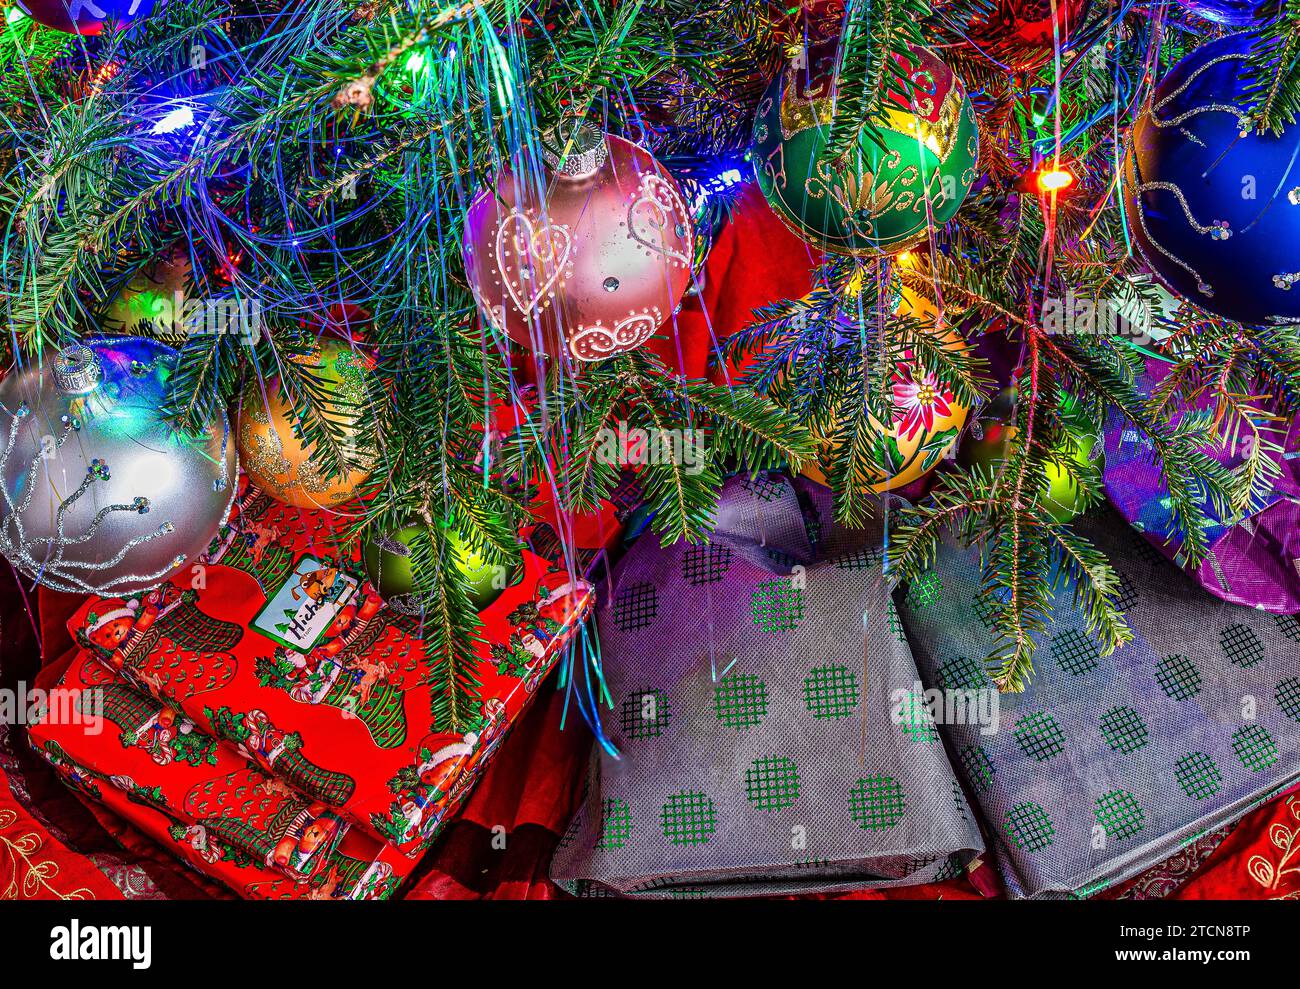 Gifts under the Christmas tree. Branches with decorations and Christmas baubles.Christmas tree lights. Stock Photo